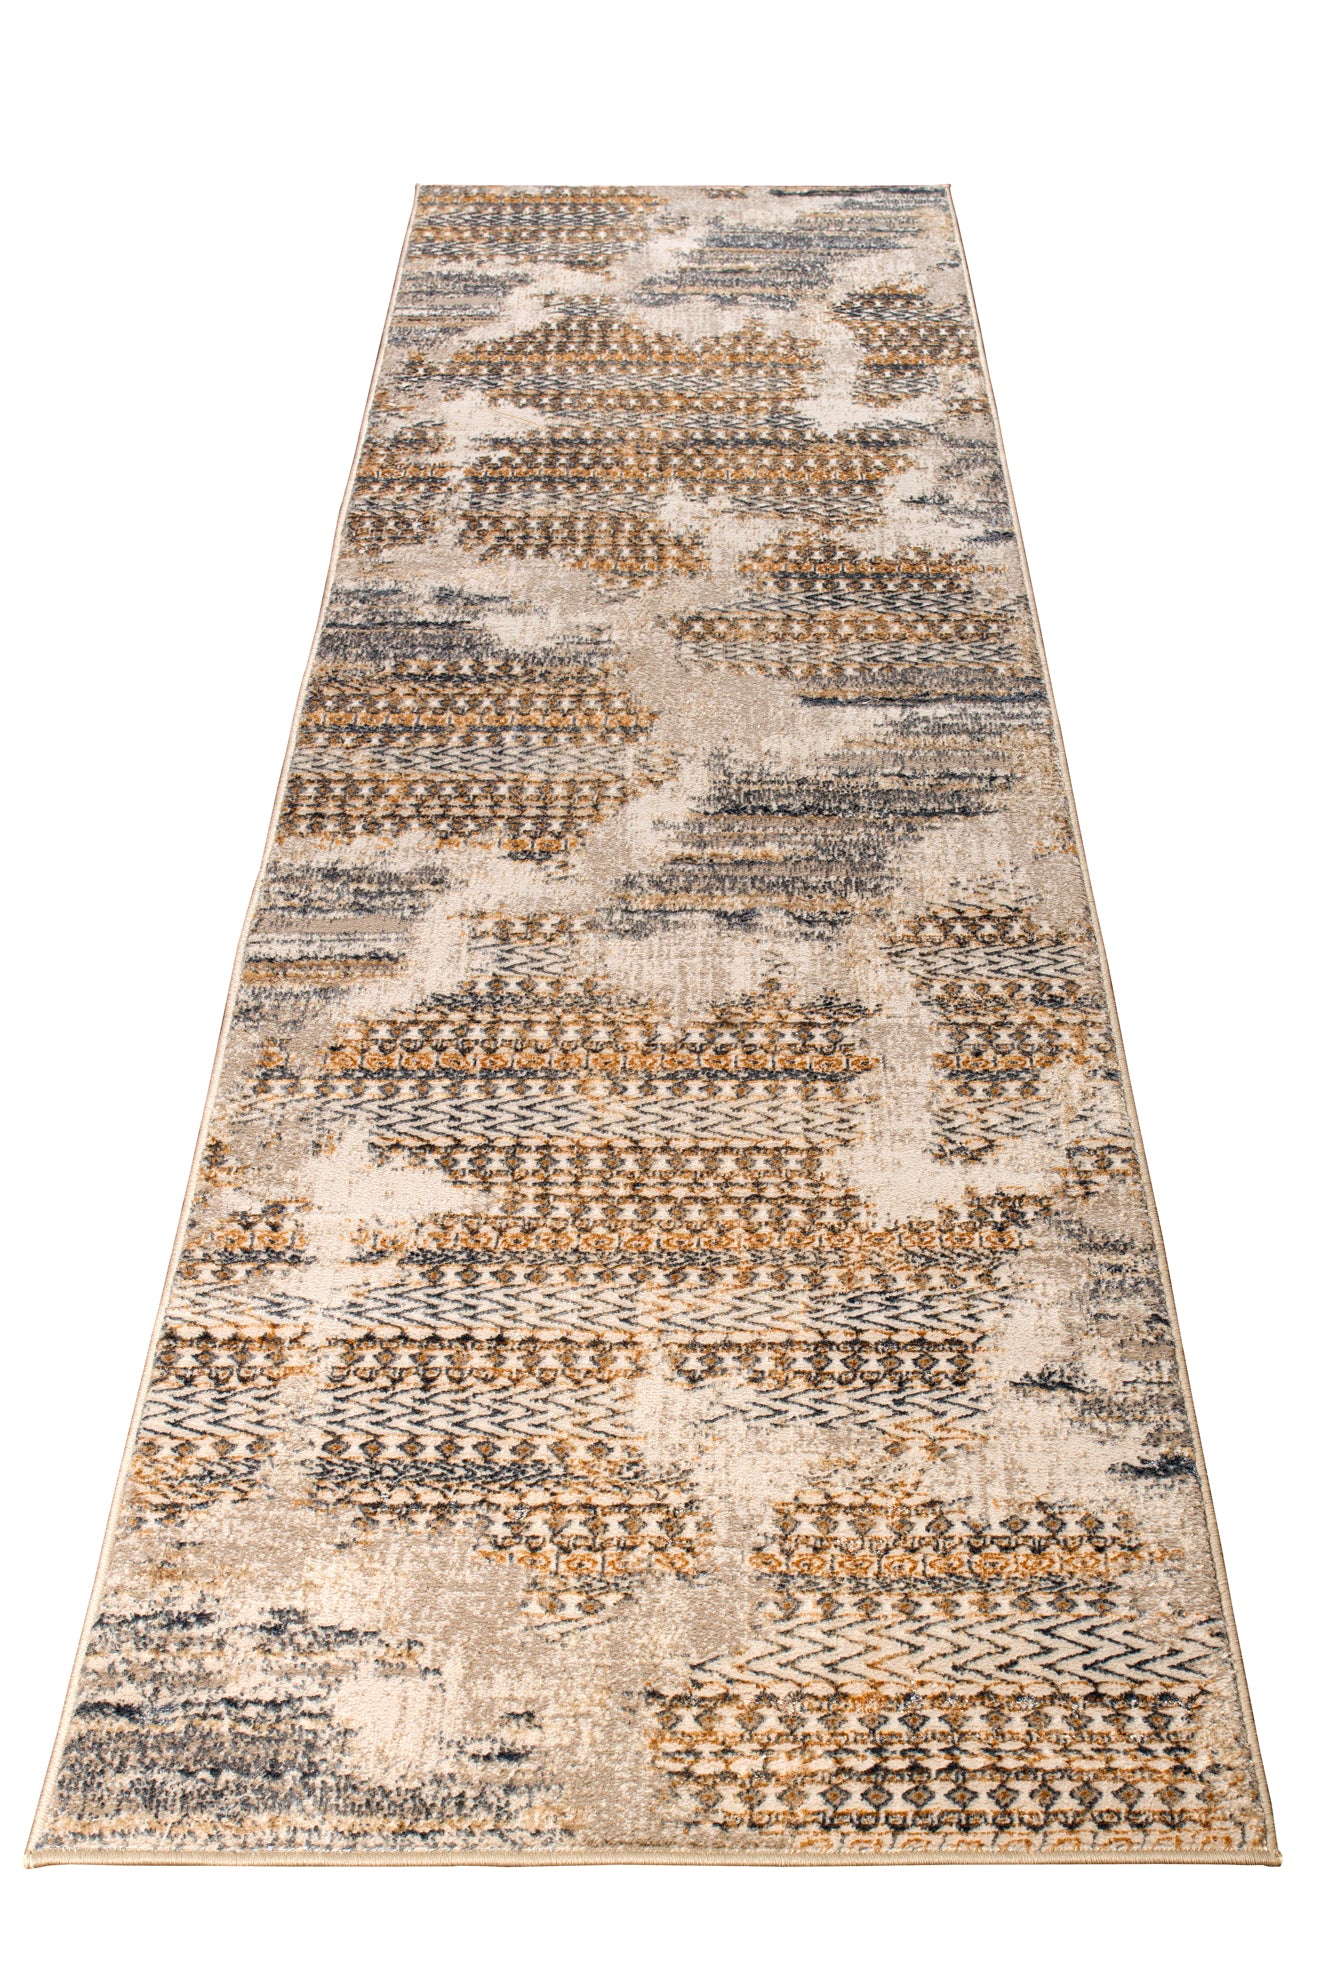 beige brown grey metalic abstract rustic modern contemporary area rug 5x7, 5x8 ft Contemporary, Living Room Carpet, Bedroom, Home Office